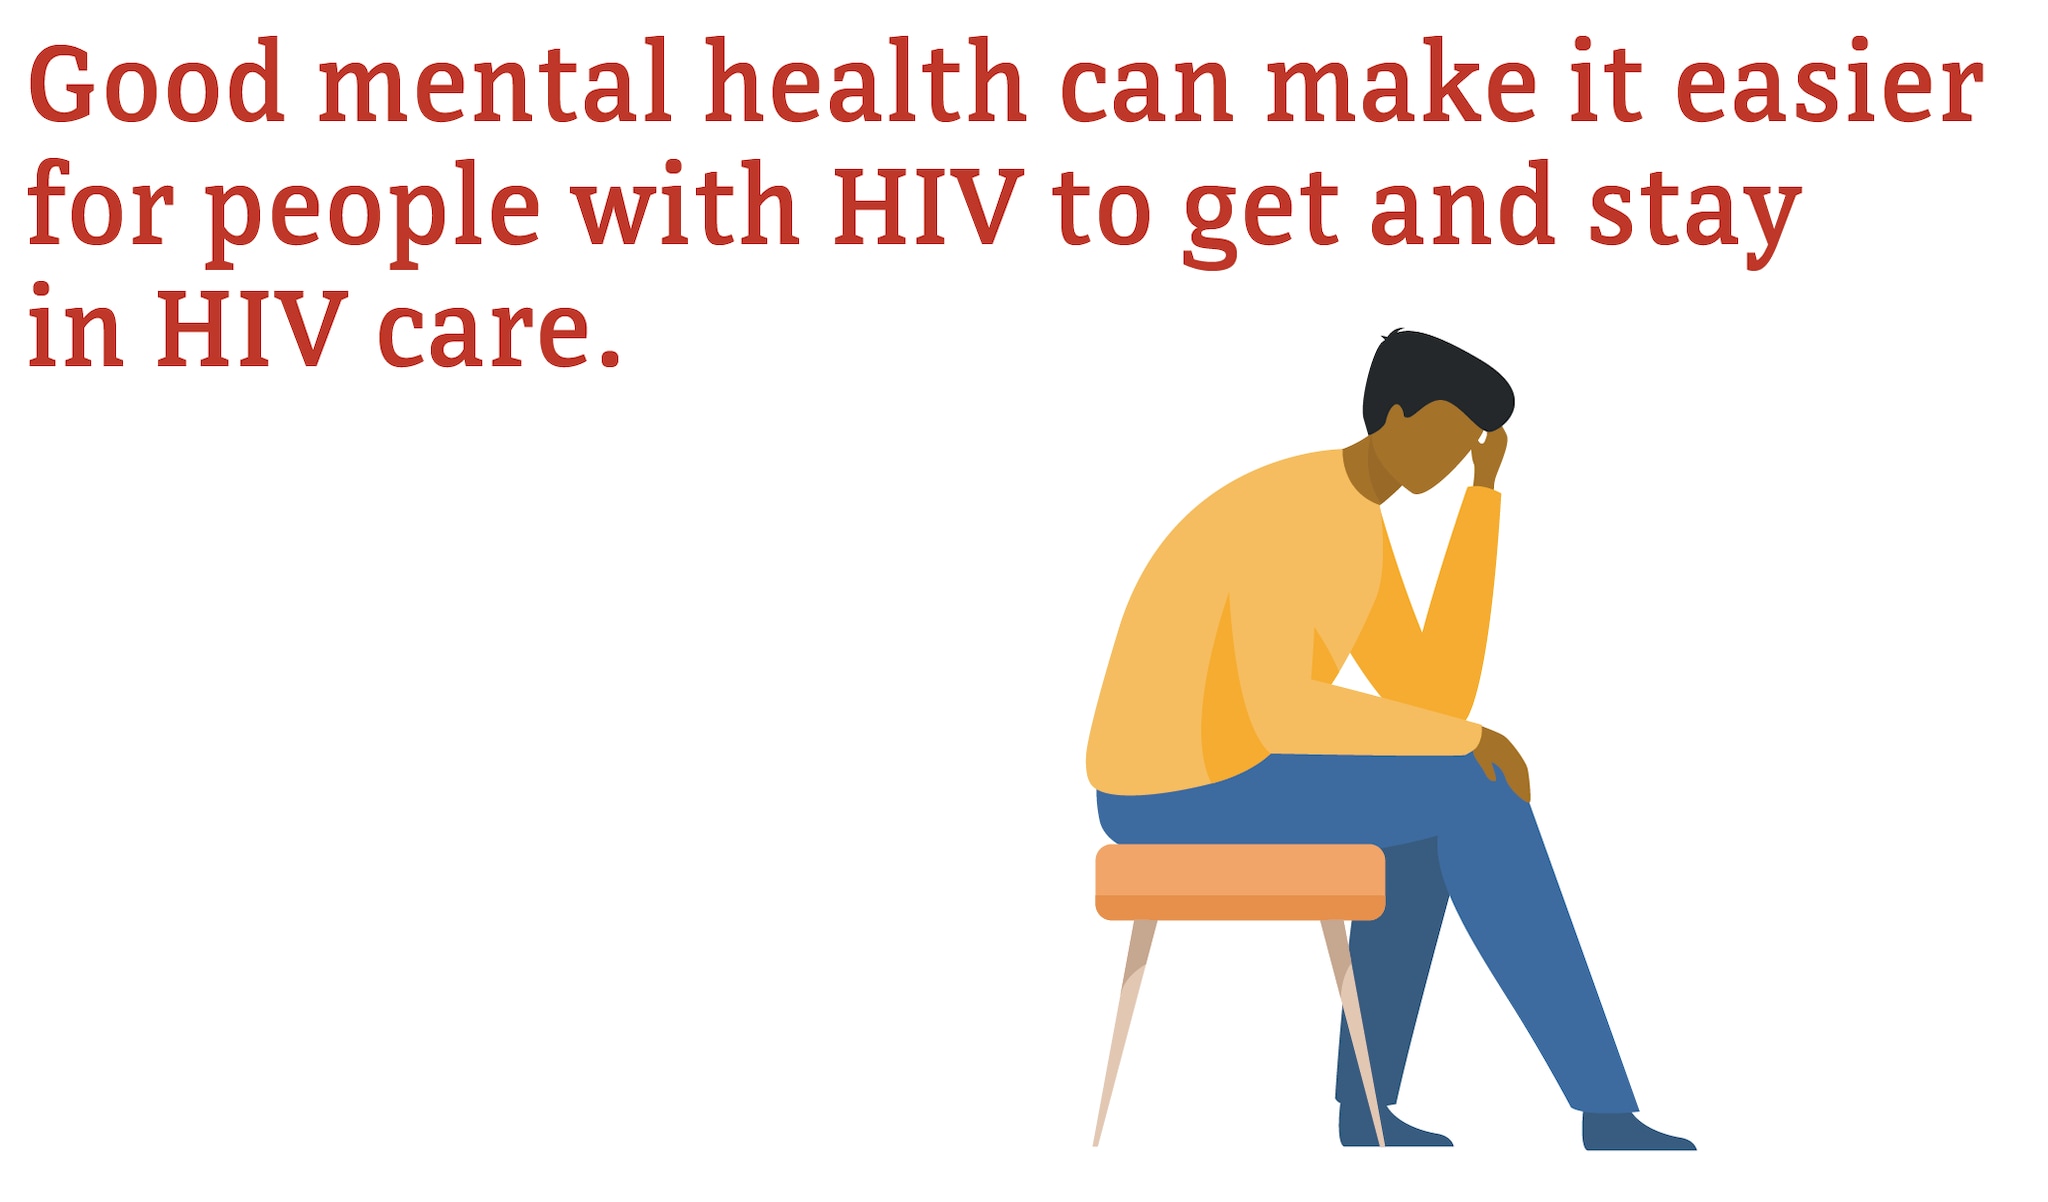 Good mental health can make it easier for people with HIV to get and stay in HIV care.